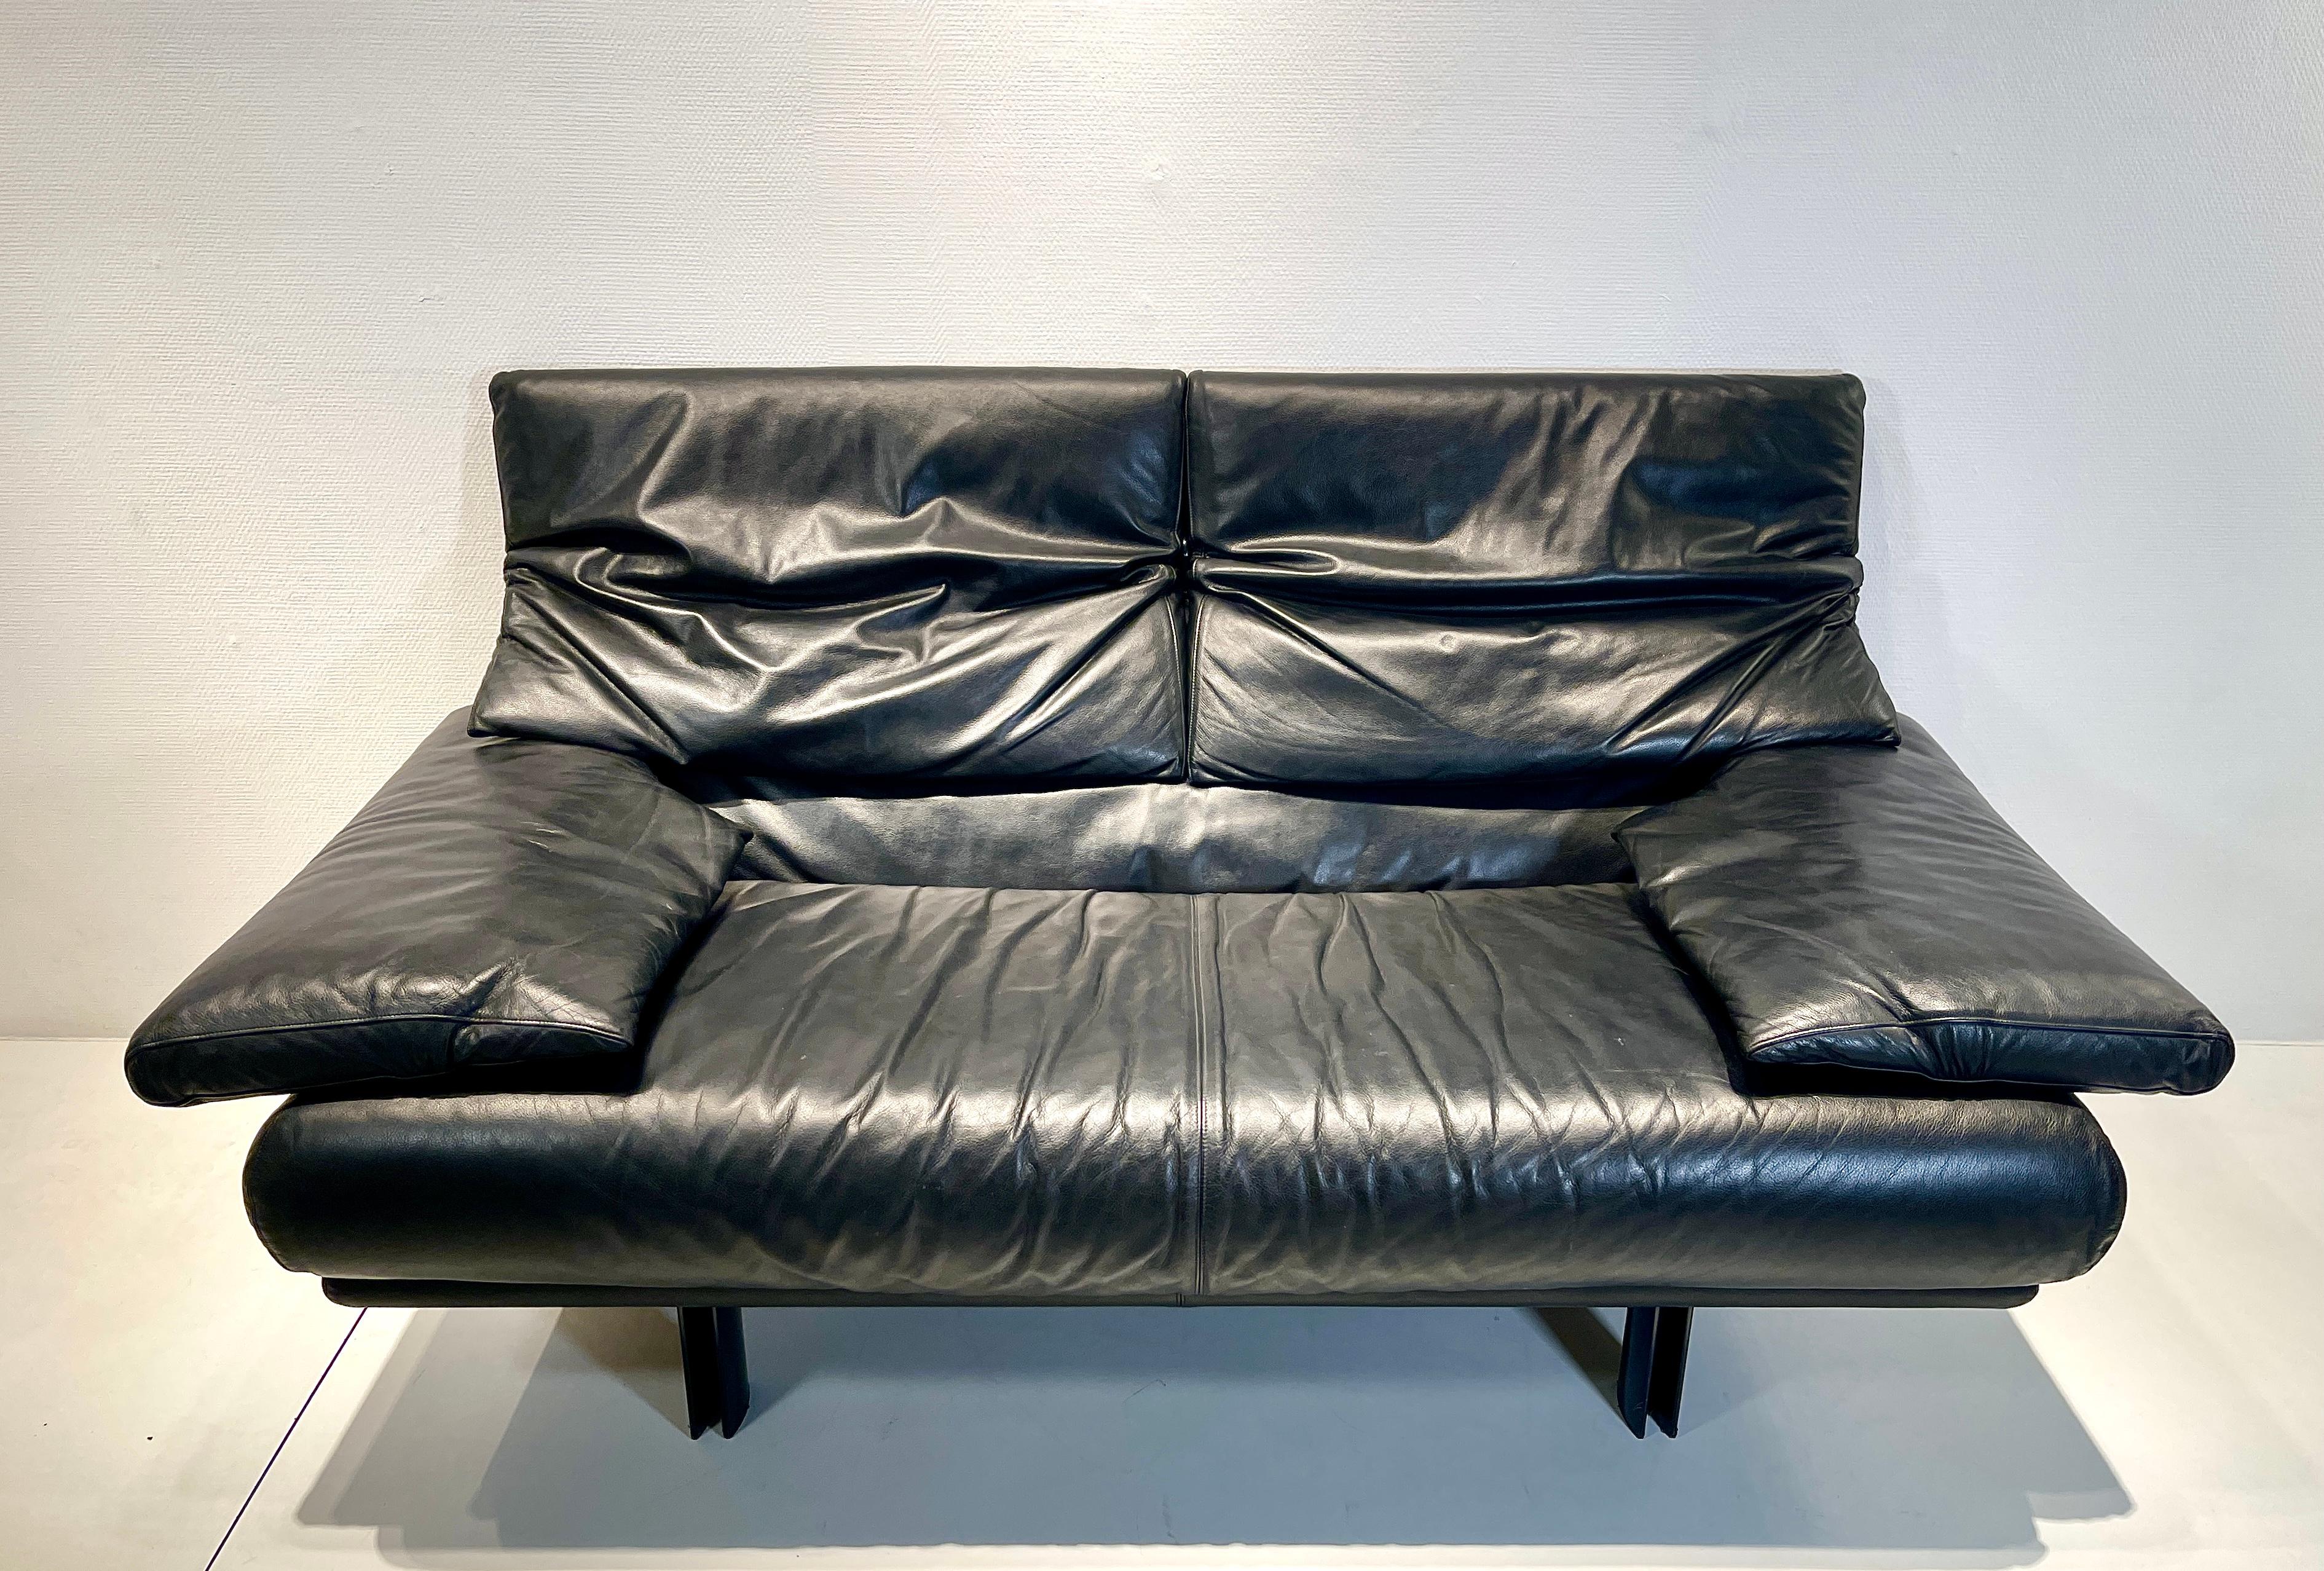 Original vintage B&B Italia sofa in very good condition.

It concerns the very rare 2 seat (170 cm) in very high-quality, supple Perle leather, colour black, with back and armrests that can be set in 5 positions and legs of black coated